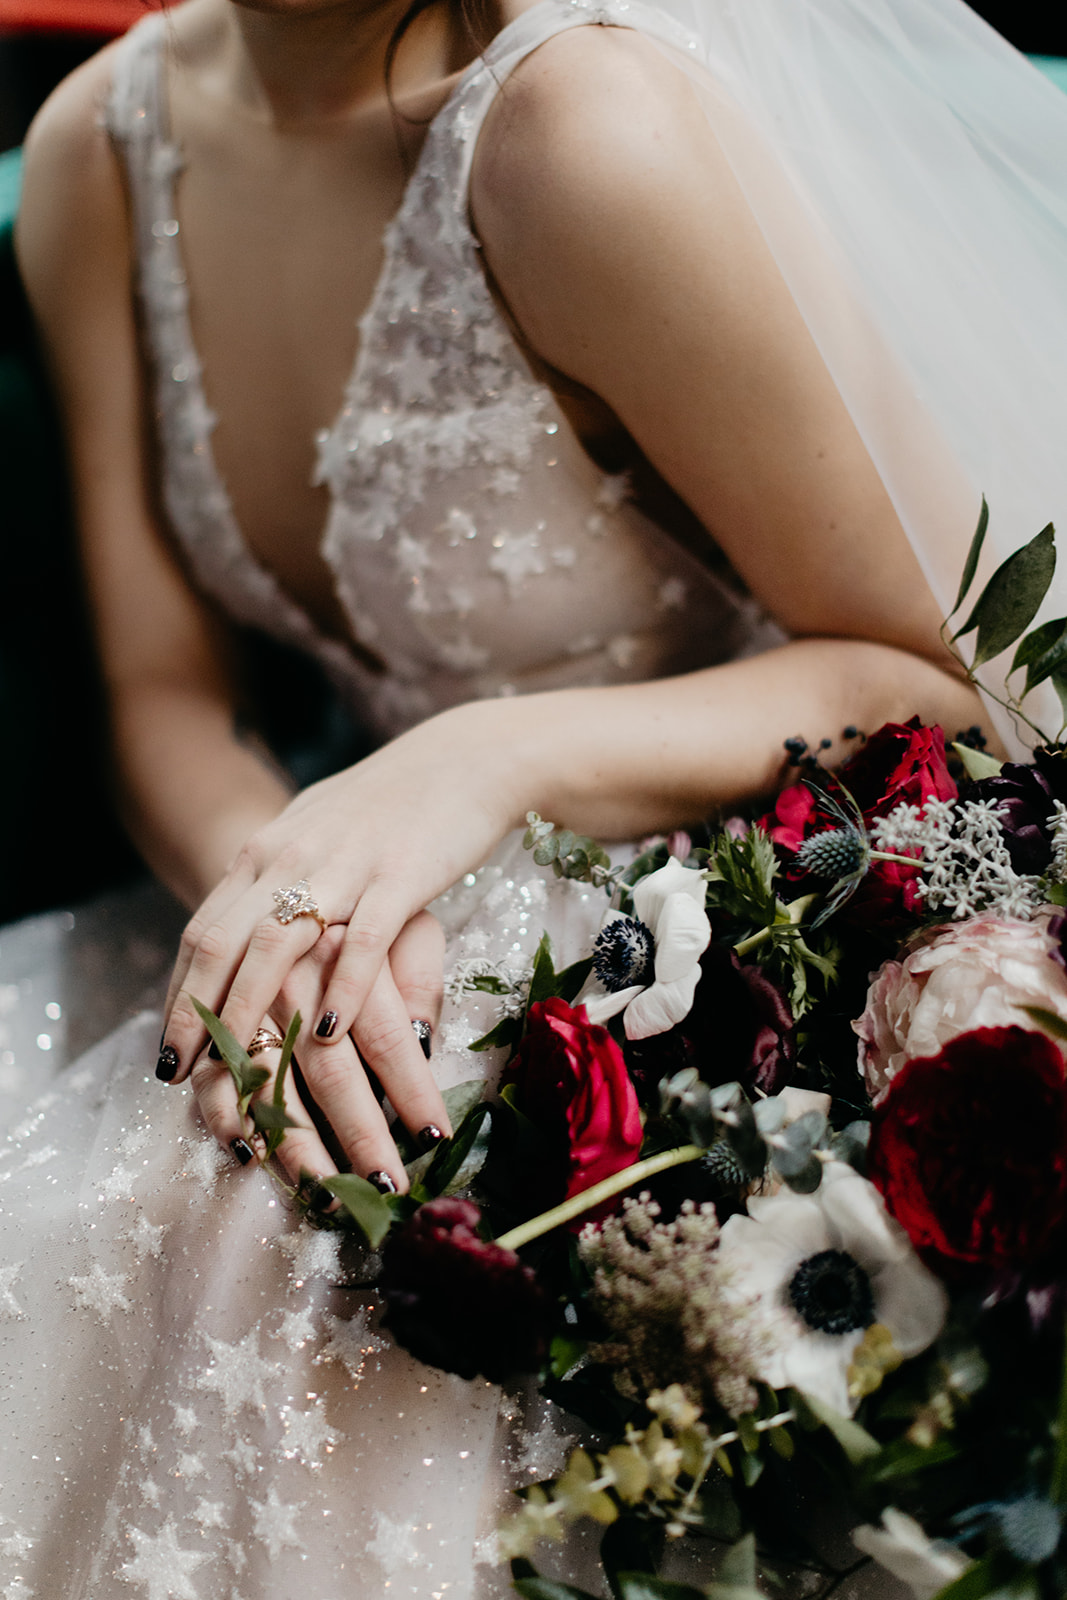 Starry wedding dress with an untamed, airy bridal bouquet with garden roses, ranunculus, and anemones in hues of burgundy and jewel tones. Bonus: green velvet couch! Wedding Floral Designer in Nashville, TN.